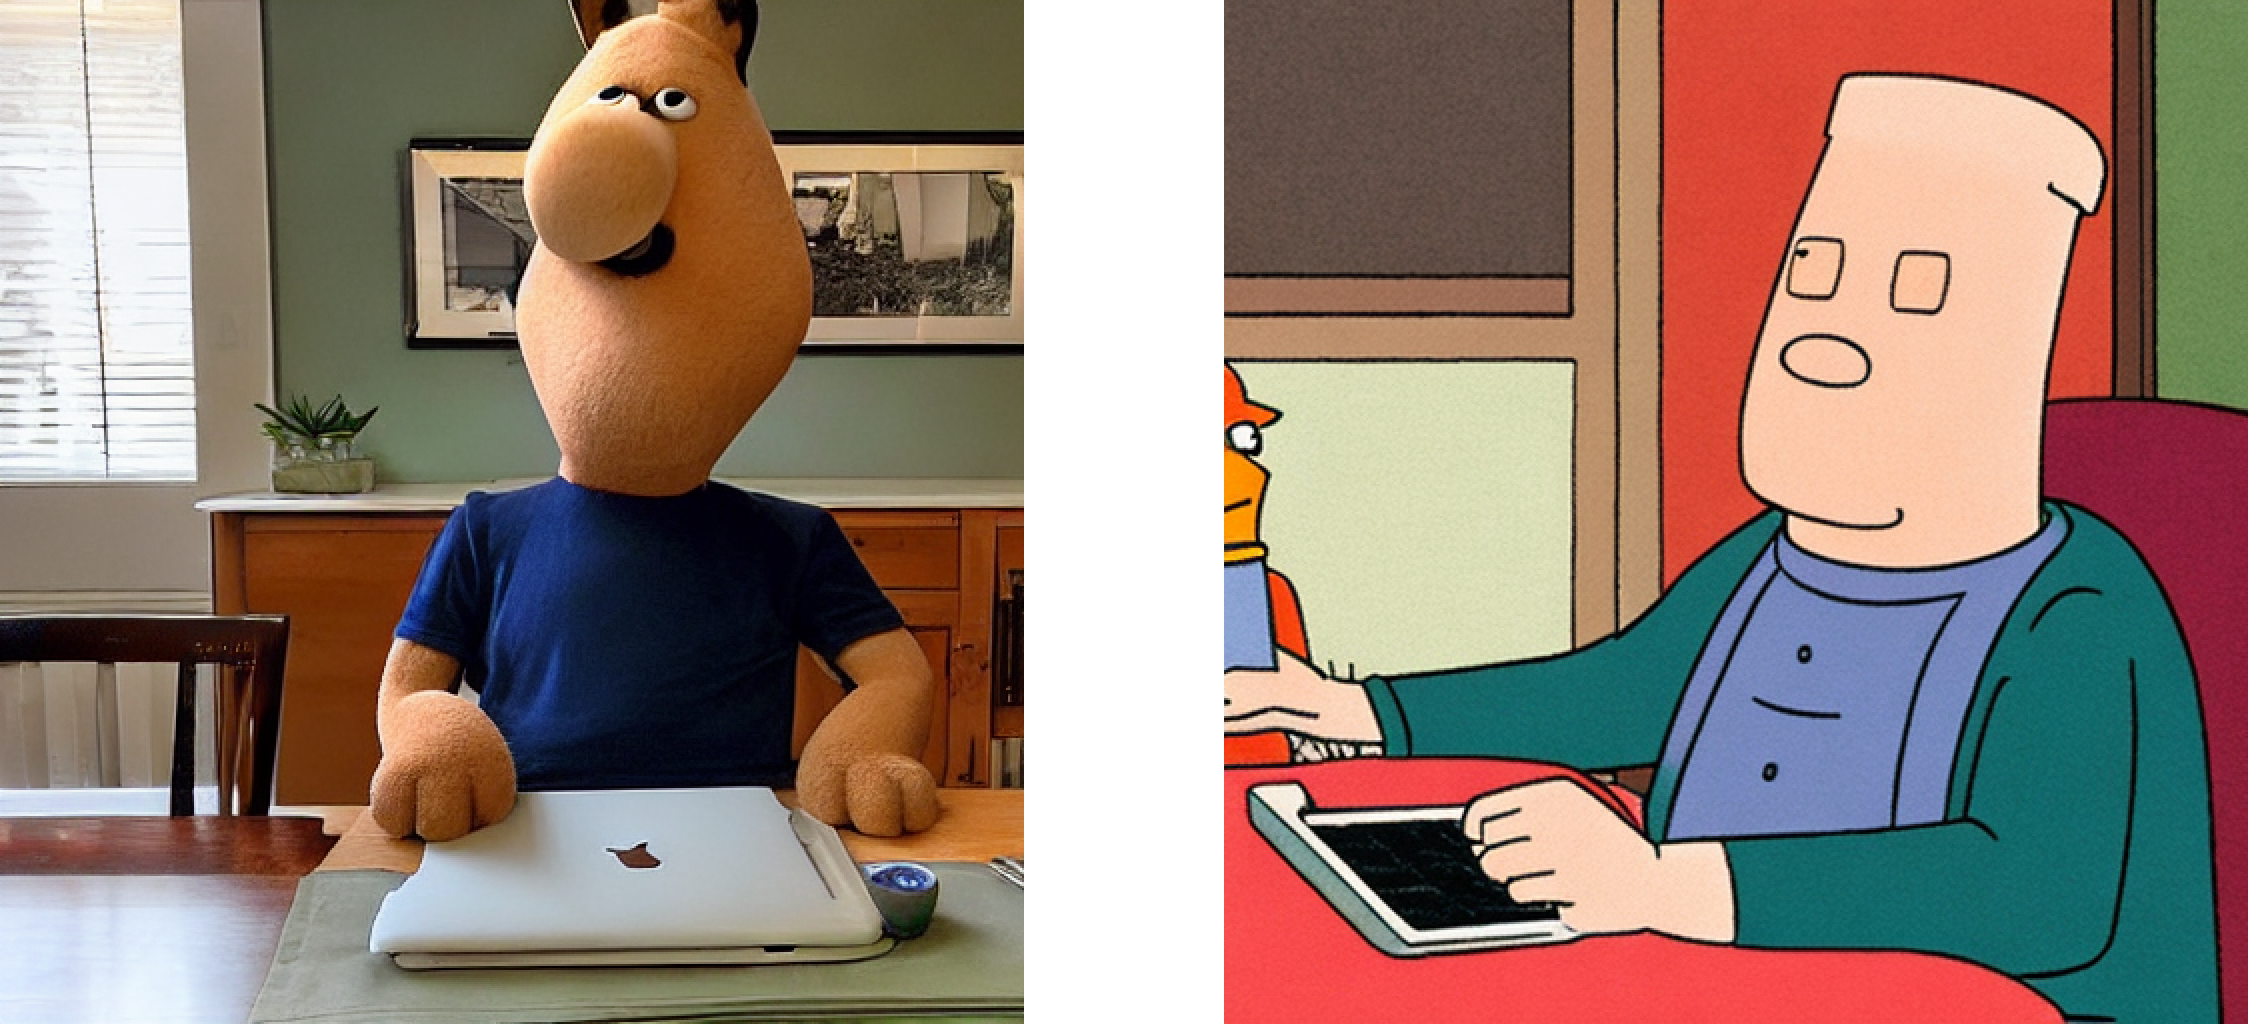 Both images were generated by a model and consist of a human-like figure sitting at a table with a laptop or tablet. In the left image, the figure looks like a puppet sitting in a realistic setting. The right image looks like a cartoon.